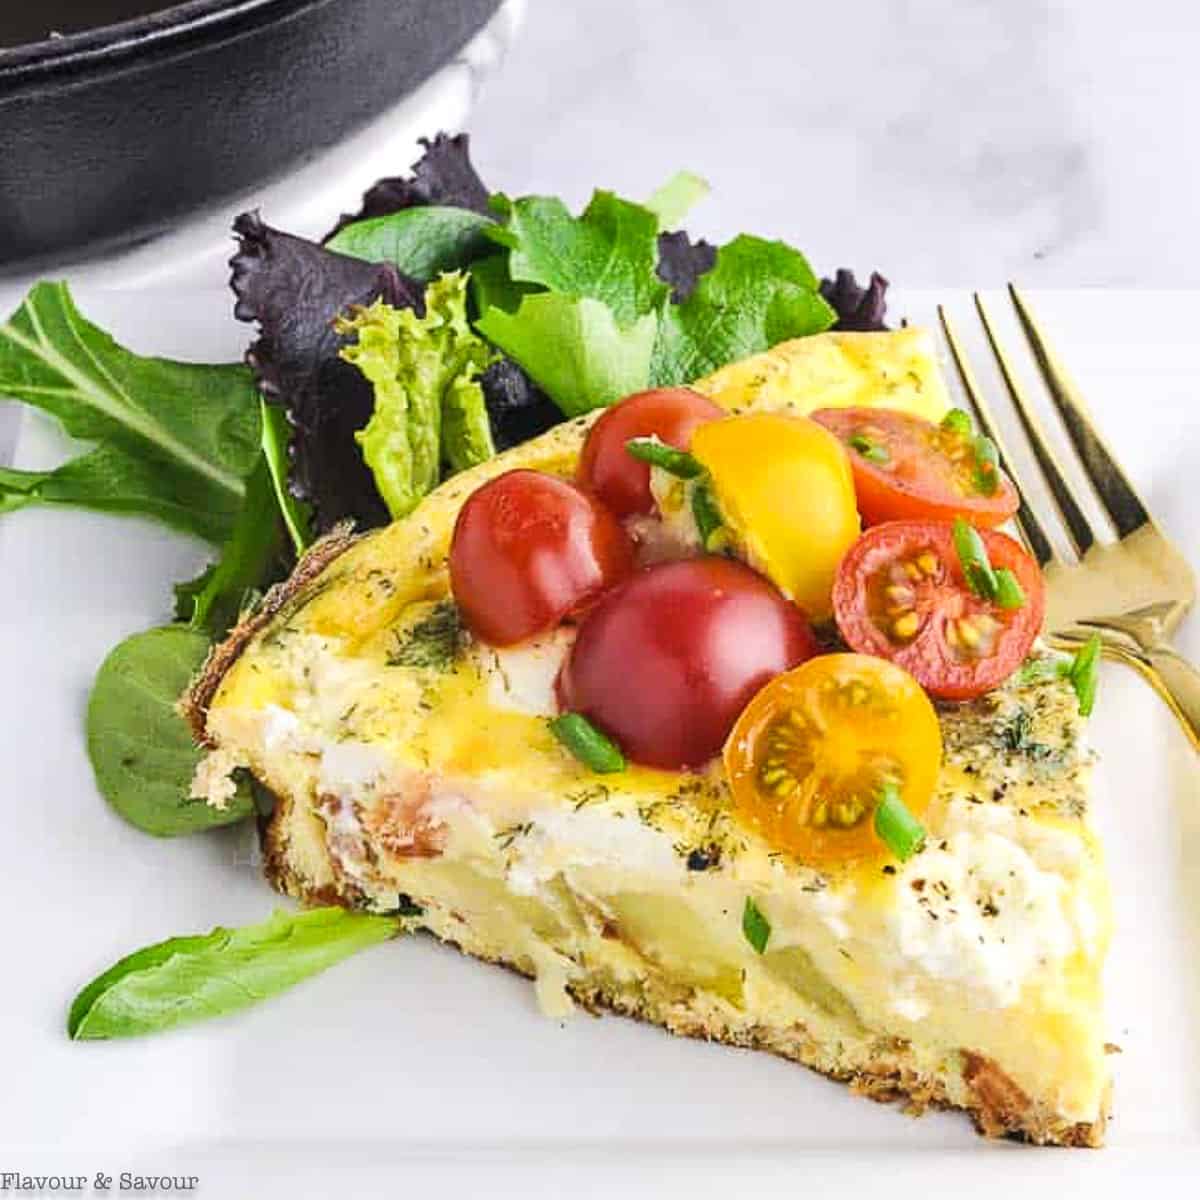 A wedge of smoked salmon spinach frittata garnished with cherry tomatoes.